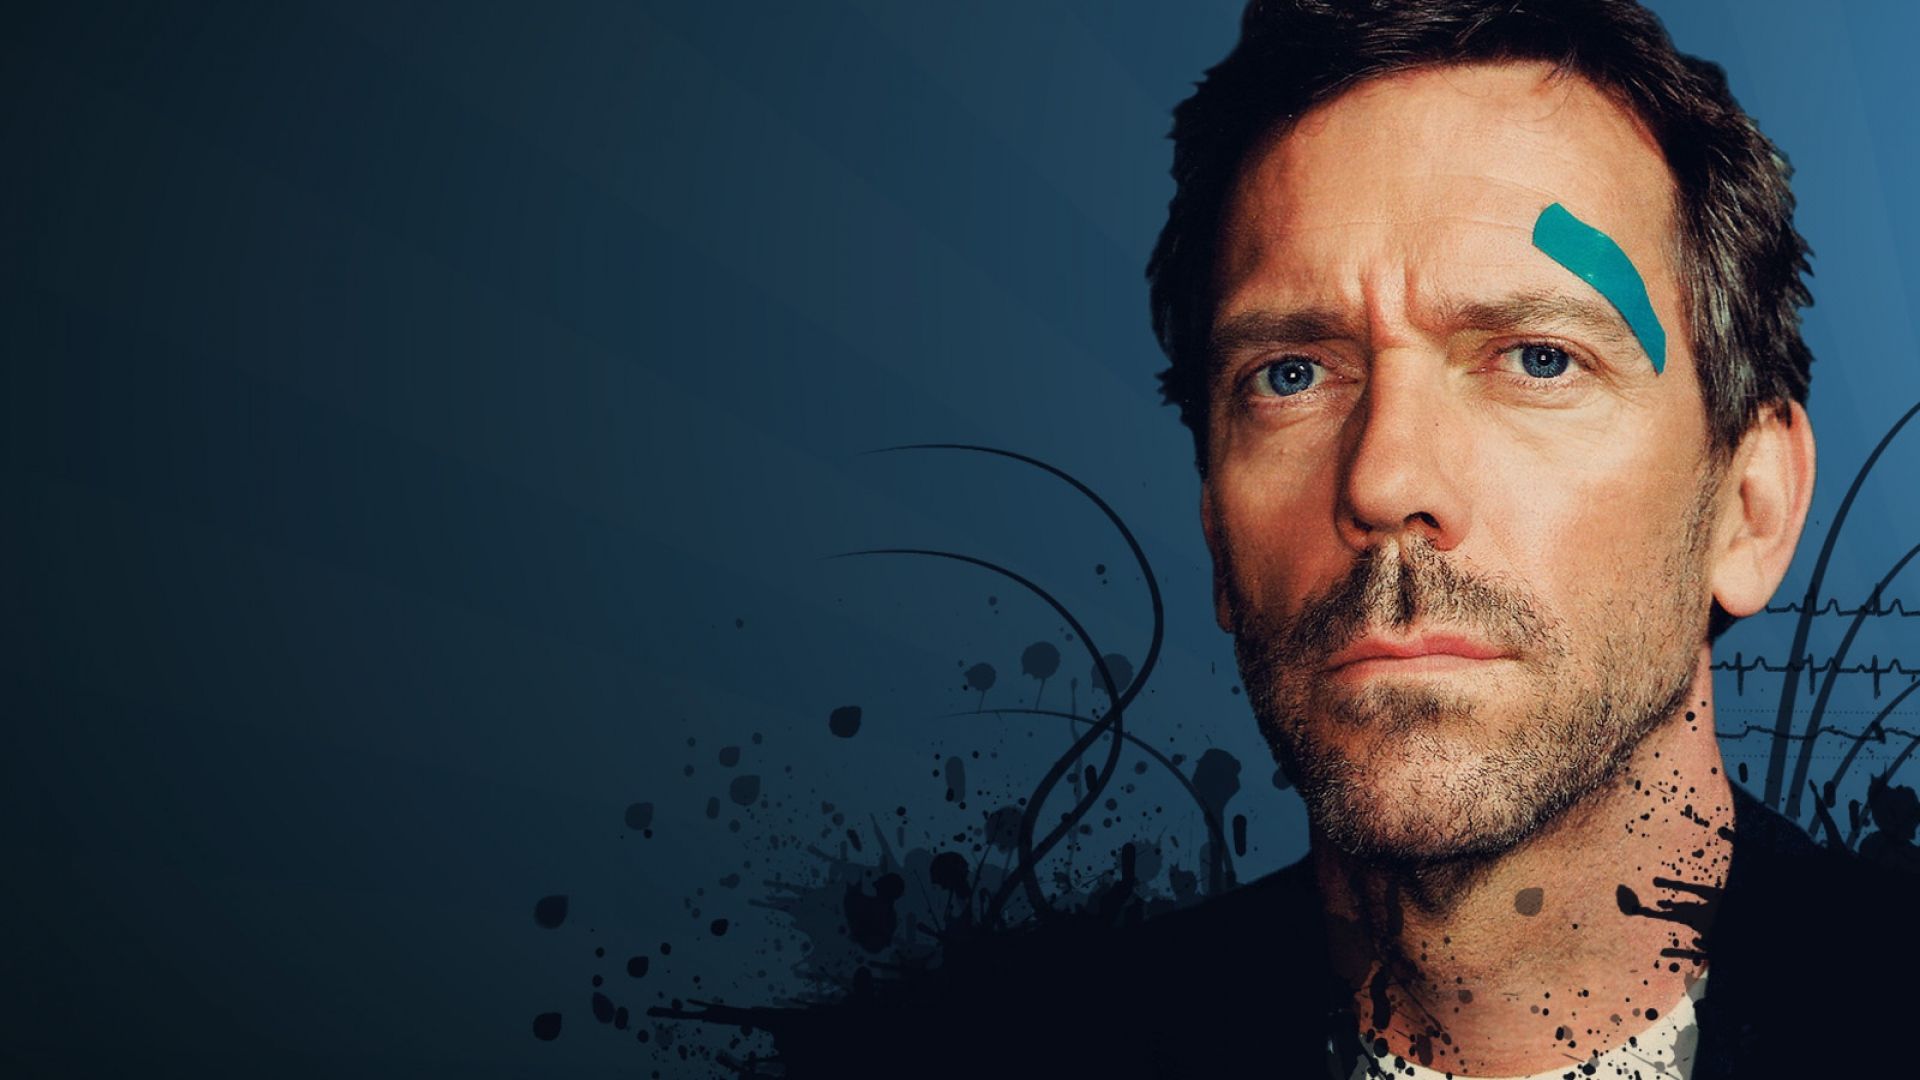 Download Wallpaper 1920x1080 hugh laurie, dr house, actor, celebrity, eyes, scar Full HD 1080p HD Background